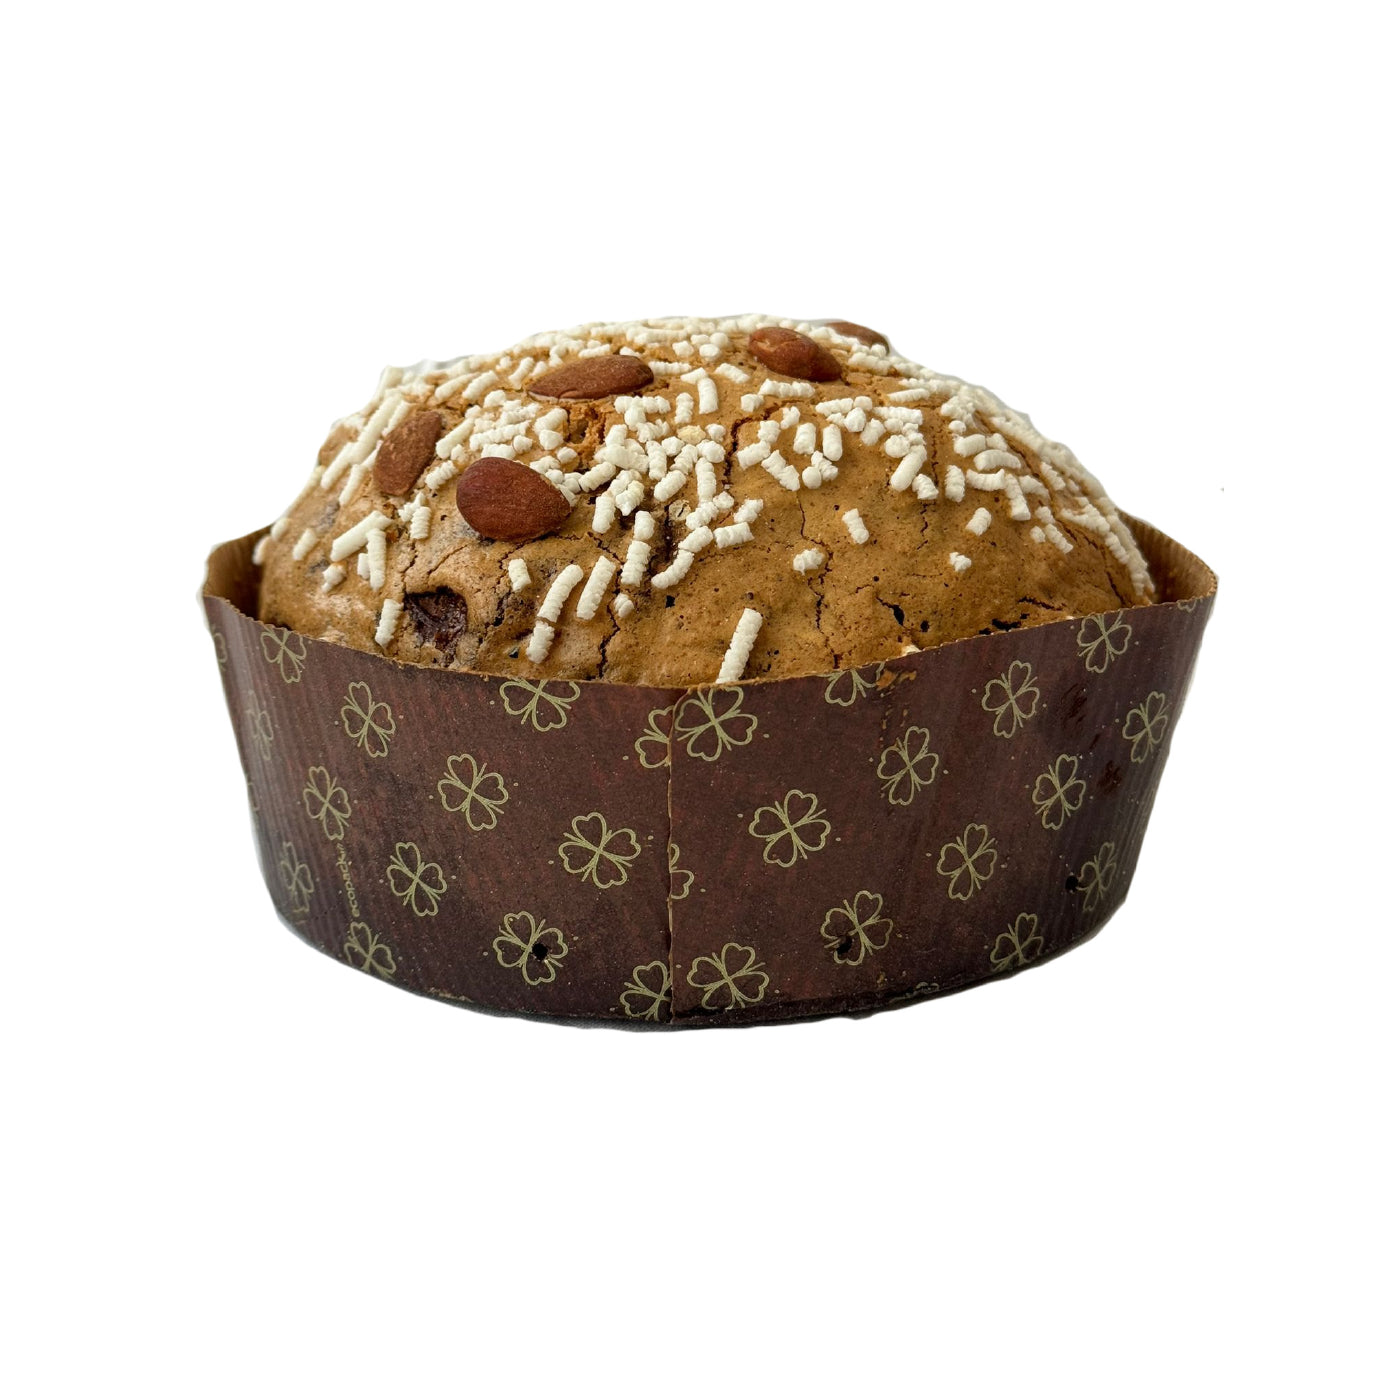 Gluten and lactose free panettone with chocolate